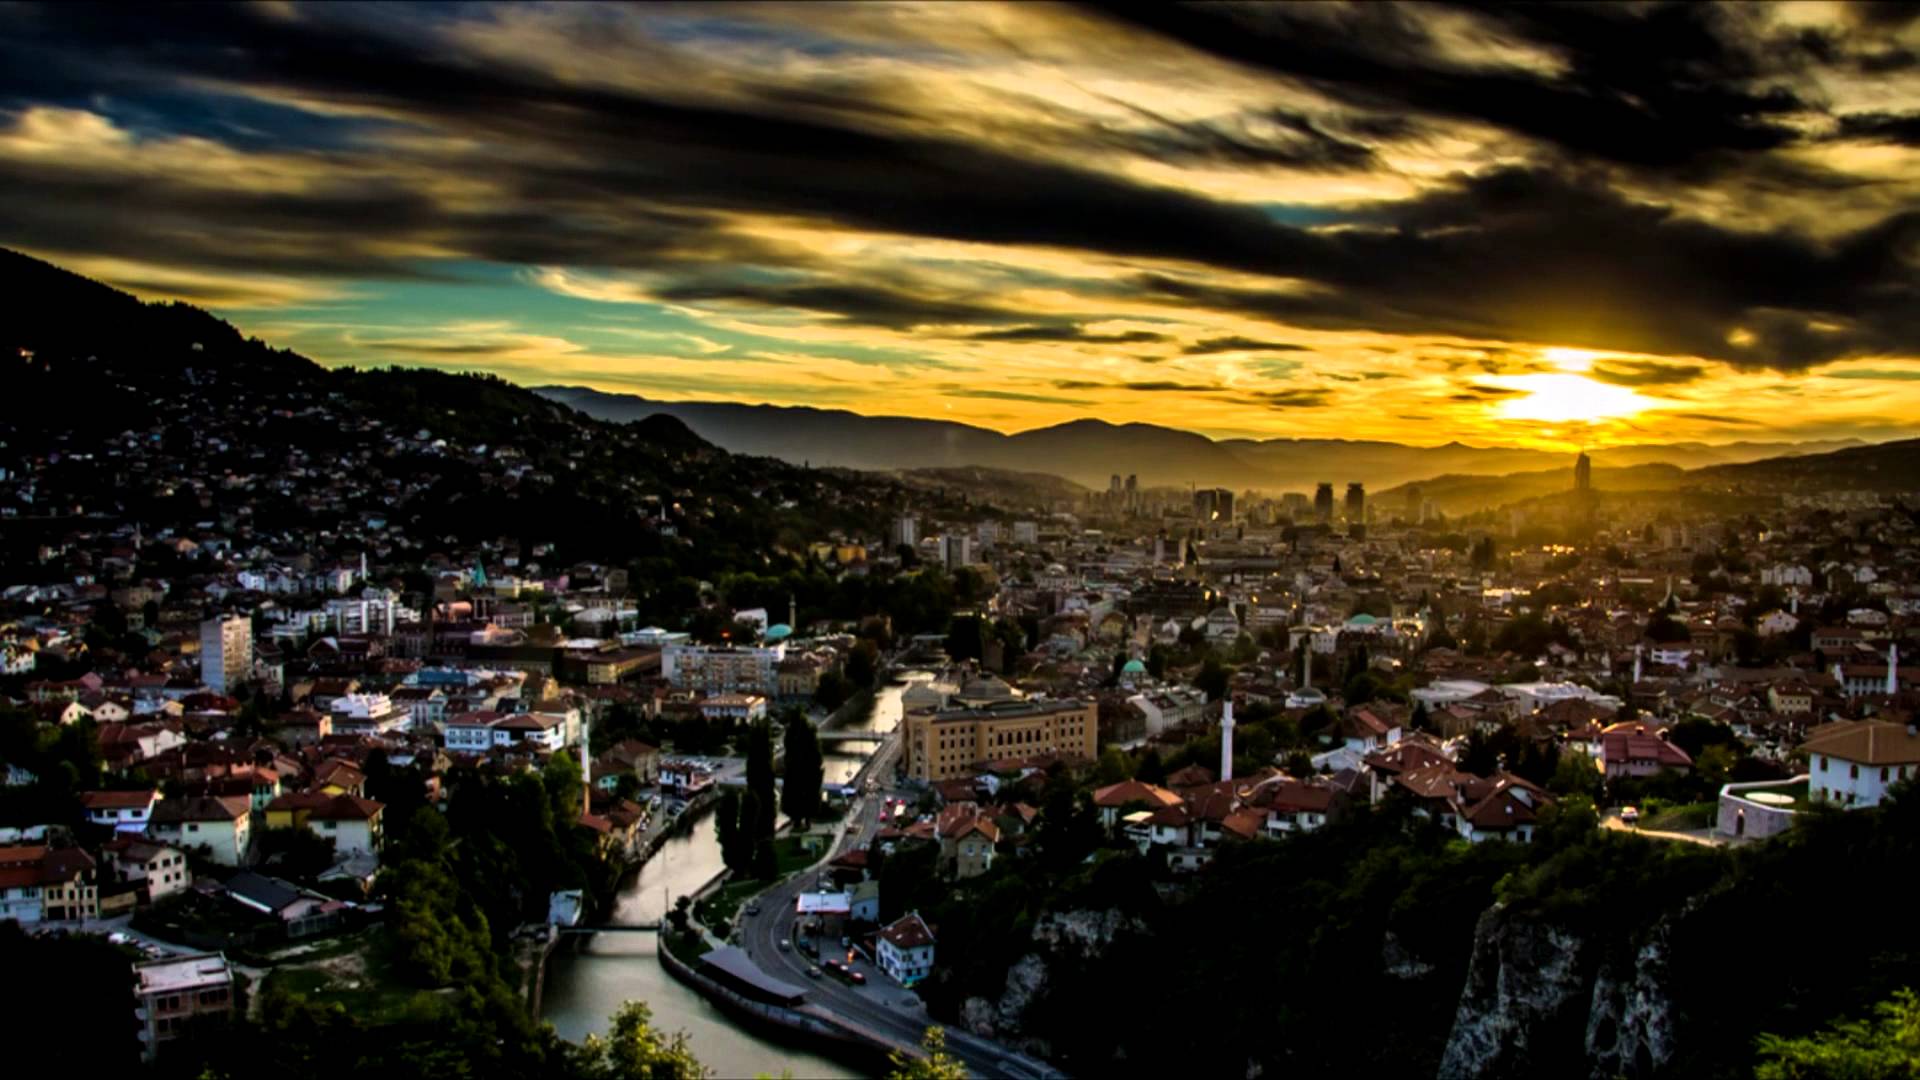 Huffington Post: Sarajevo is the Second Most Beautiful City in